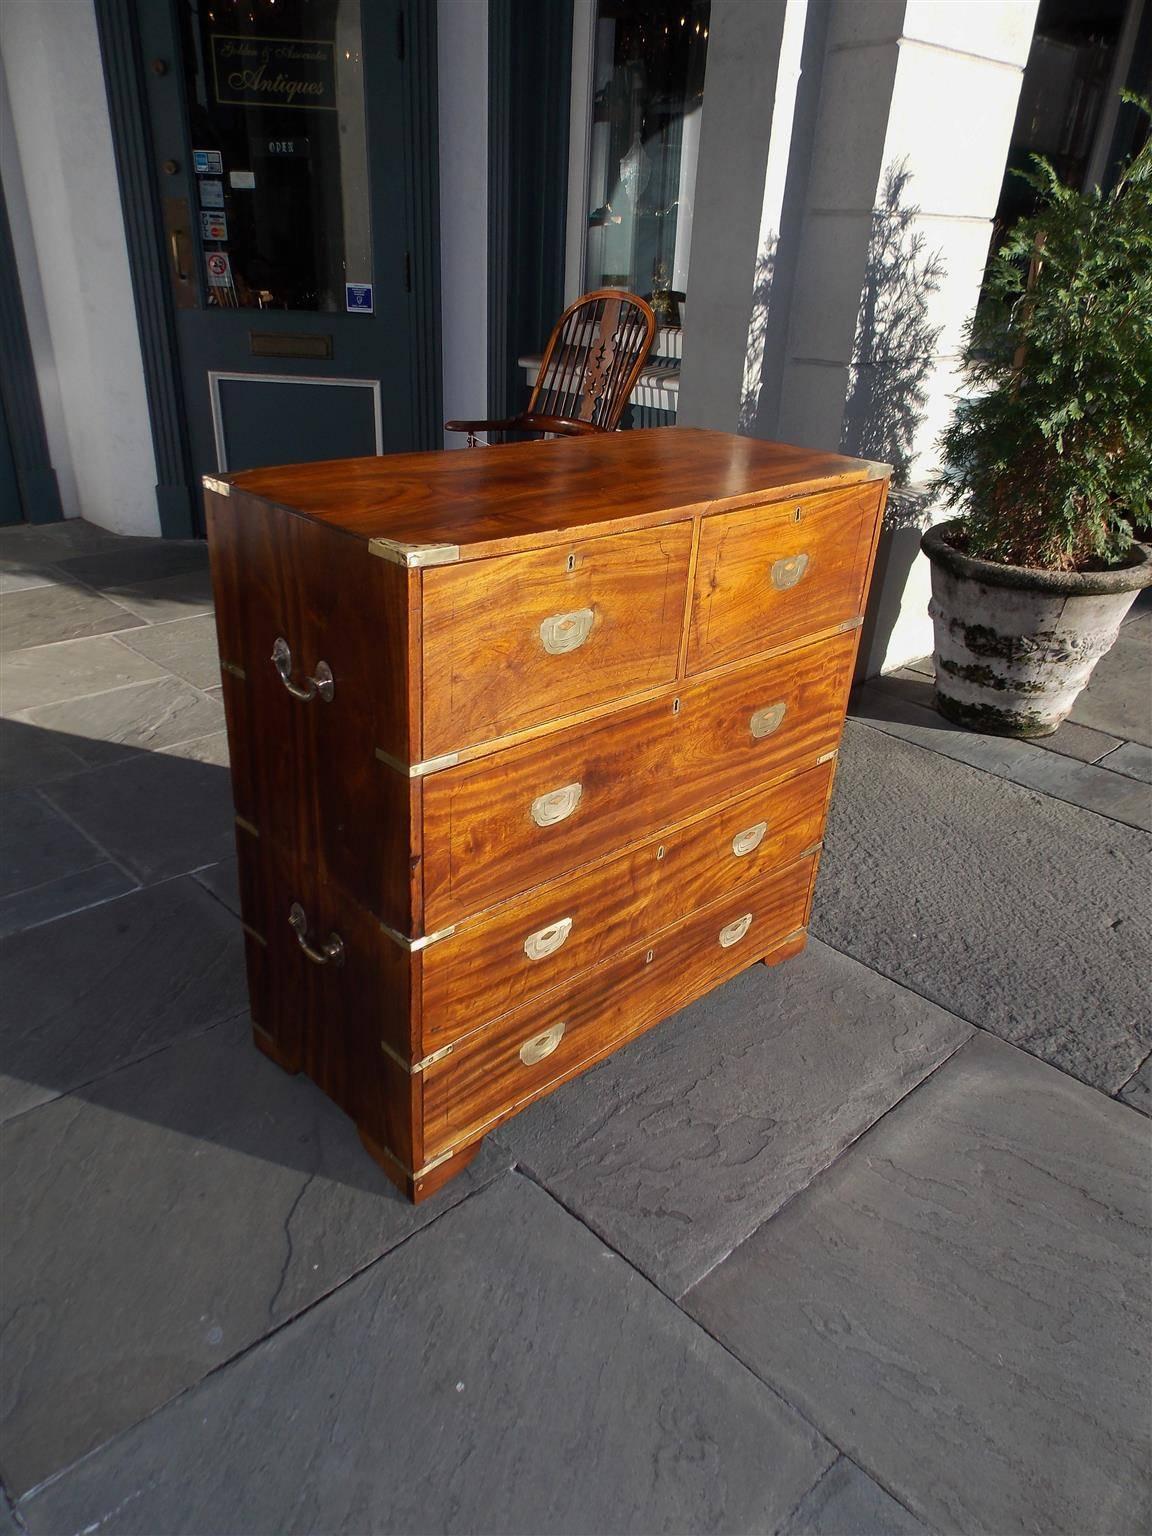 English camphor wood military five-drawer two piece campaign chest with original recessed brasses, brass corner mounts, brass side handles, and terminating on original bracket feet, Early 19th century.
Officers Chest for the field in time of war.